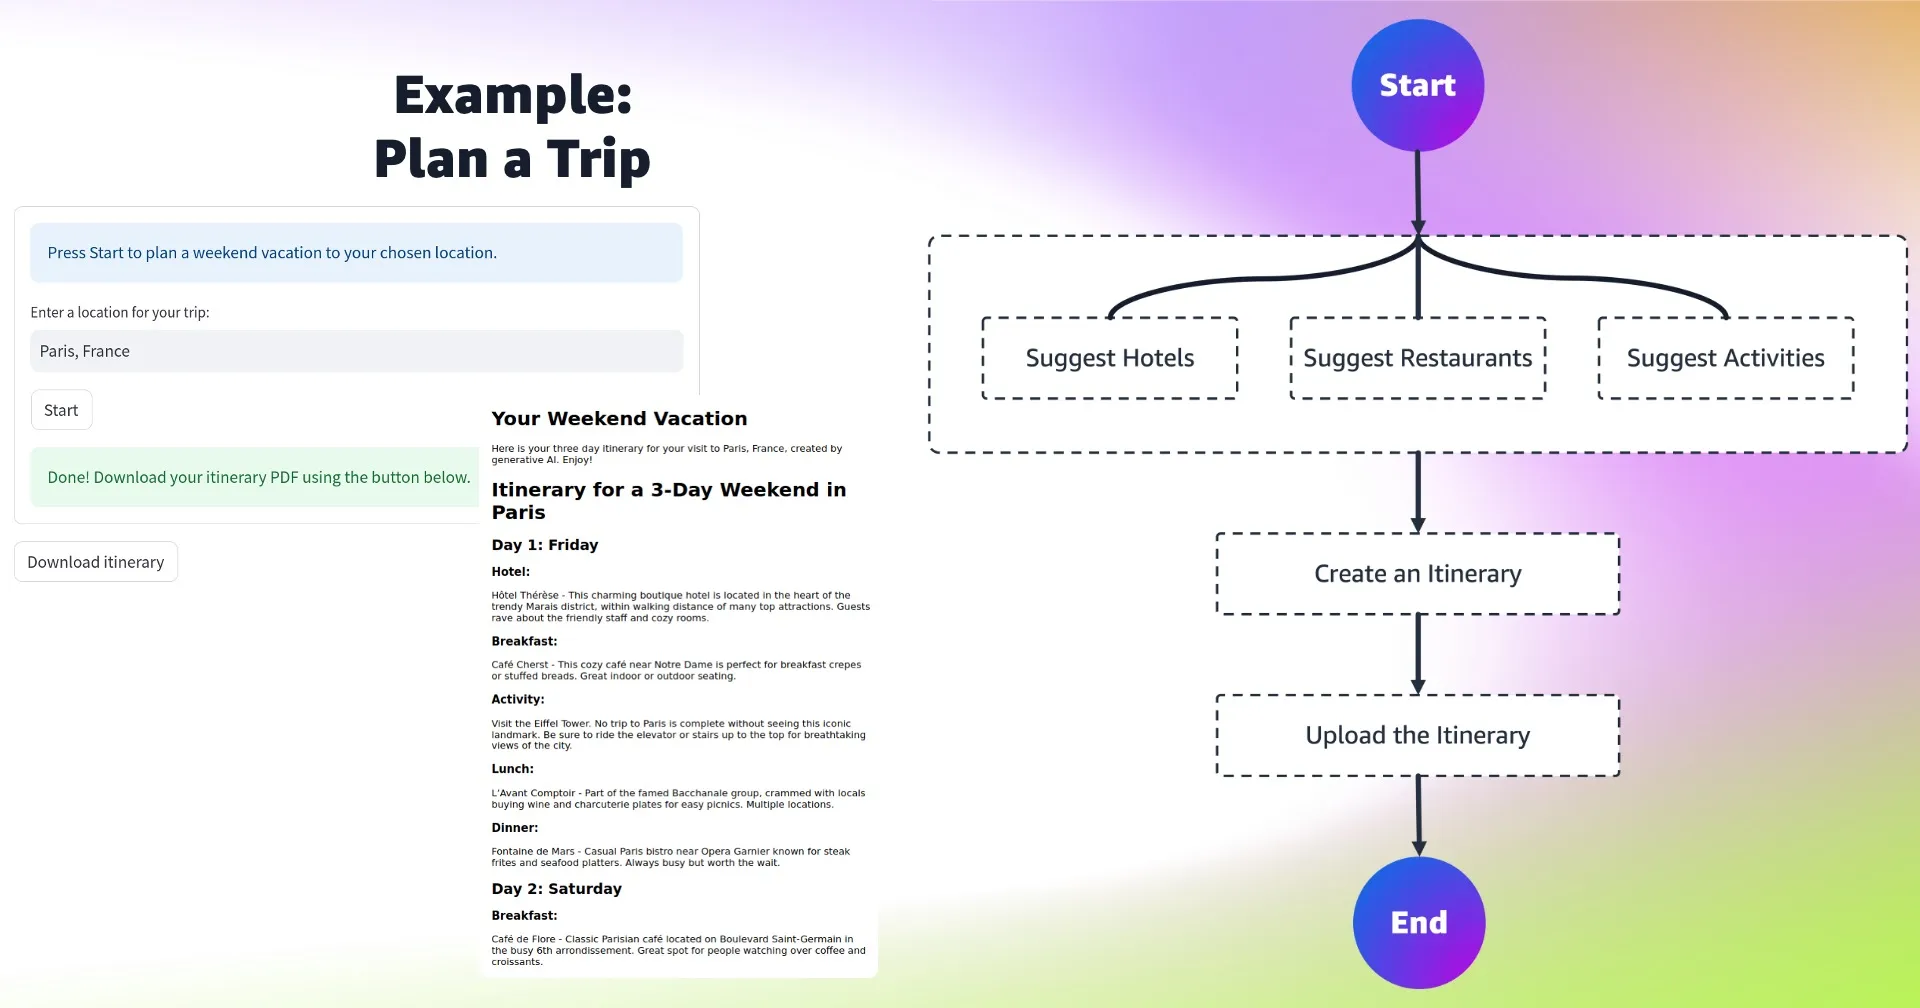 Parallel prompts for hotels, restaurants, activities combined into trip itinerary.